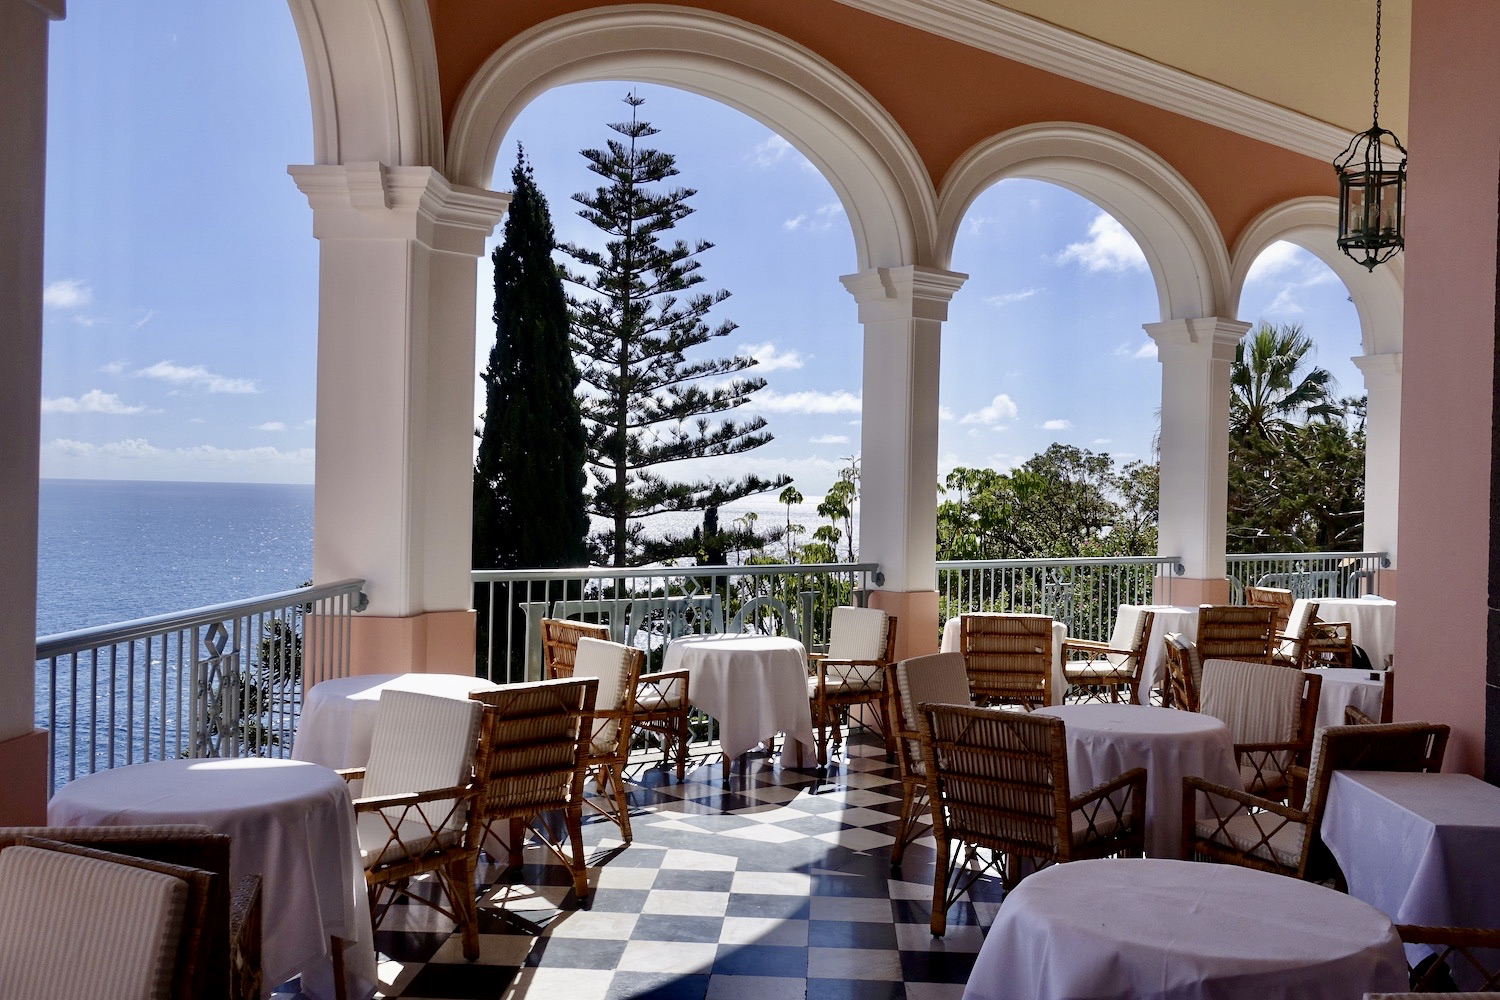 afternoon tea terrace at Reid's Palace in Madeira, Portugal